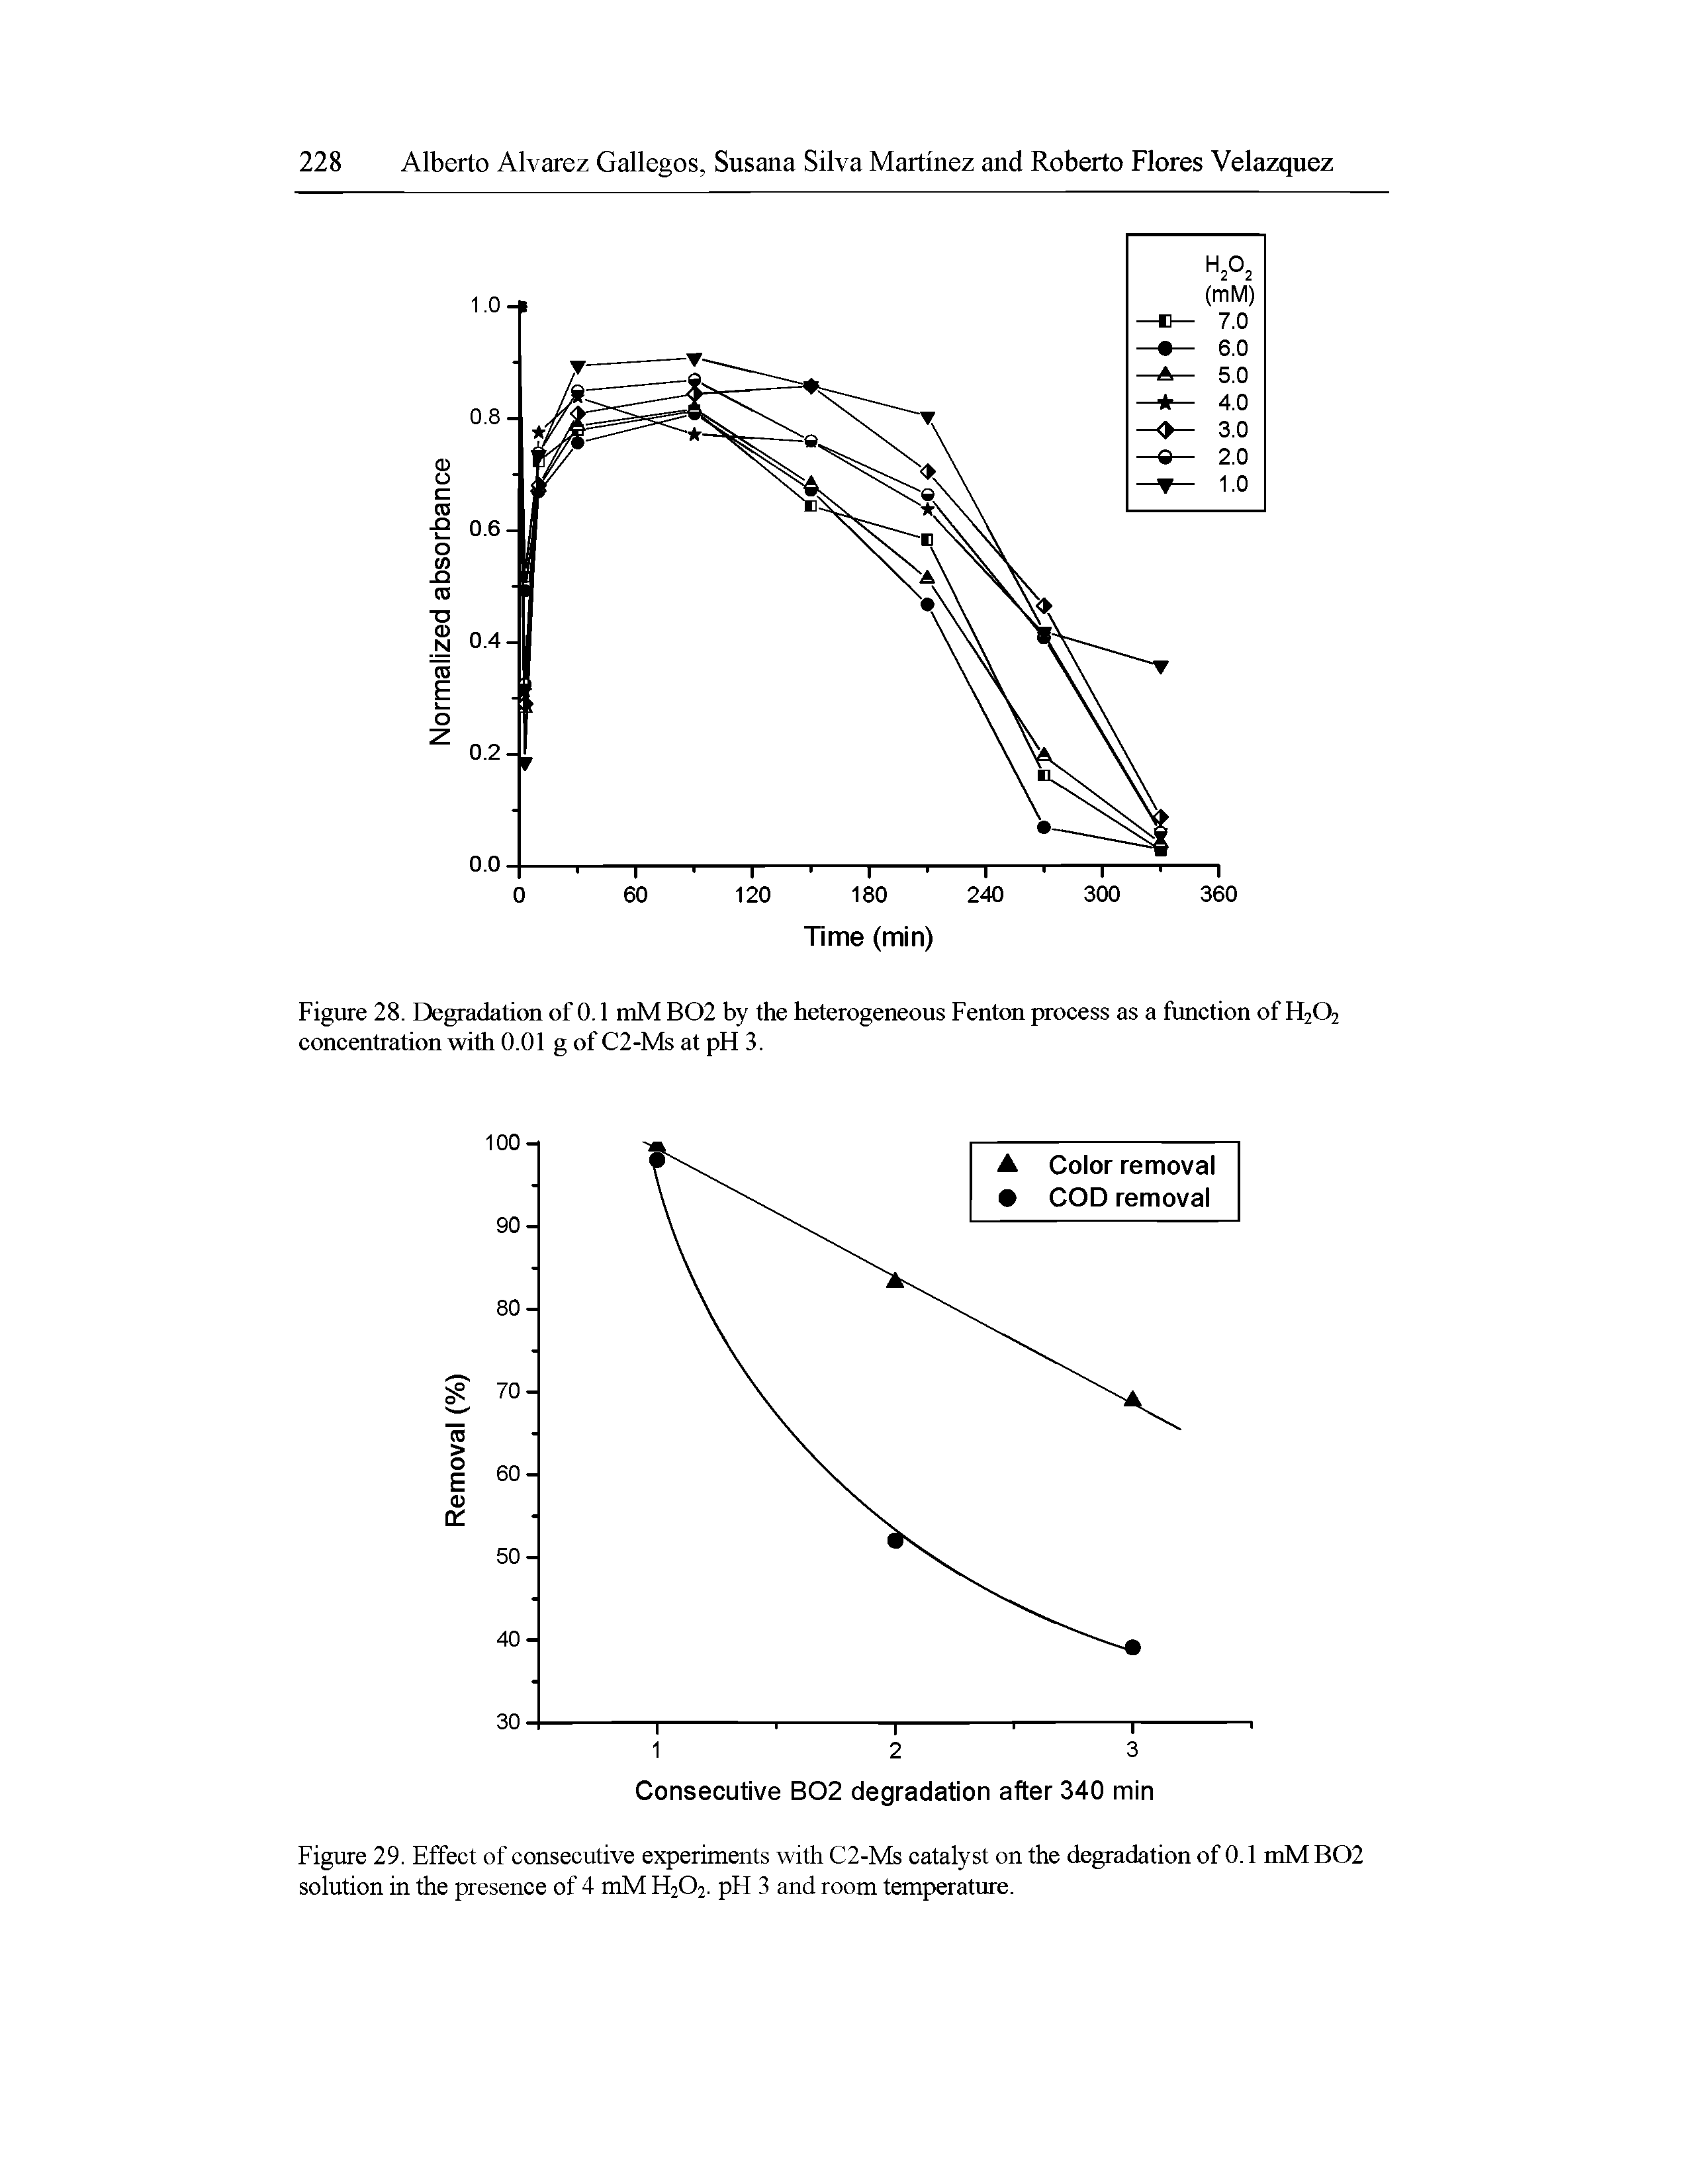 Figure 28. Degradation of 0.1 mM B02 by the heterogeneous Fenton process as a function of FI2O2 concentration with 0.01 g of C2-Ms at pH 3.